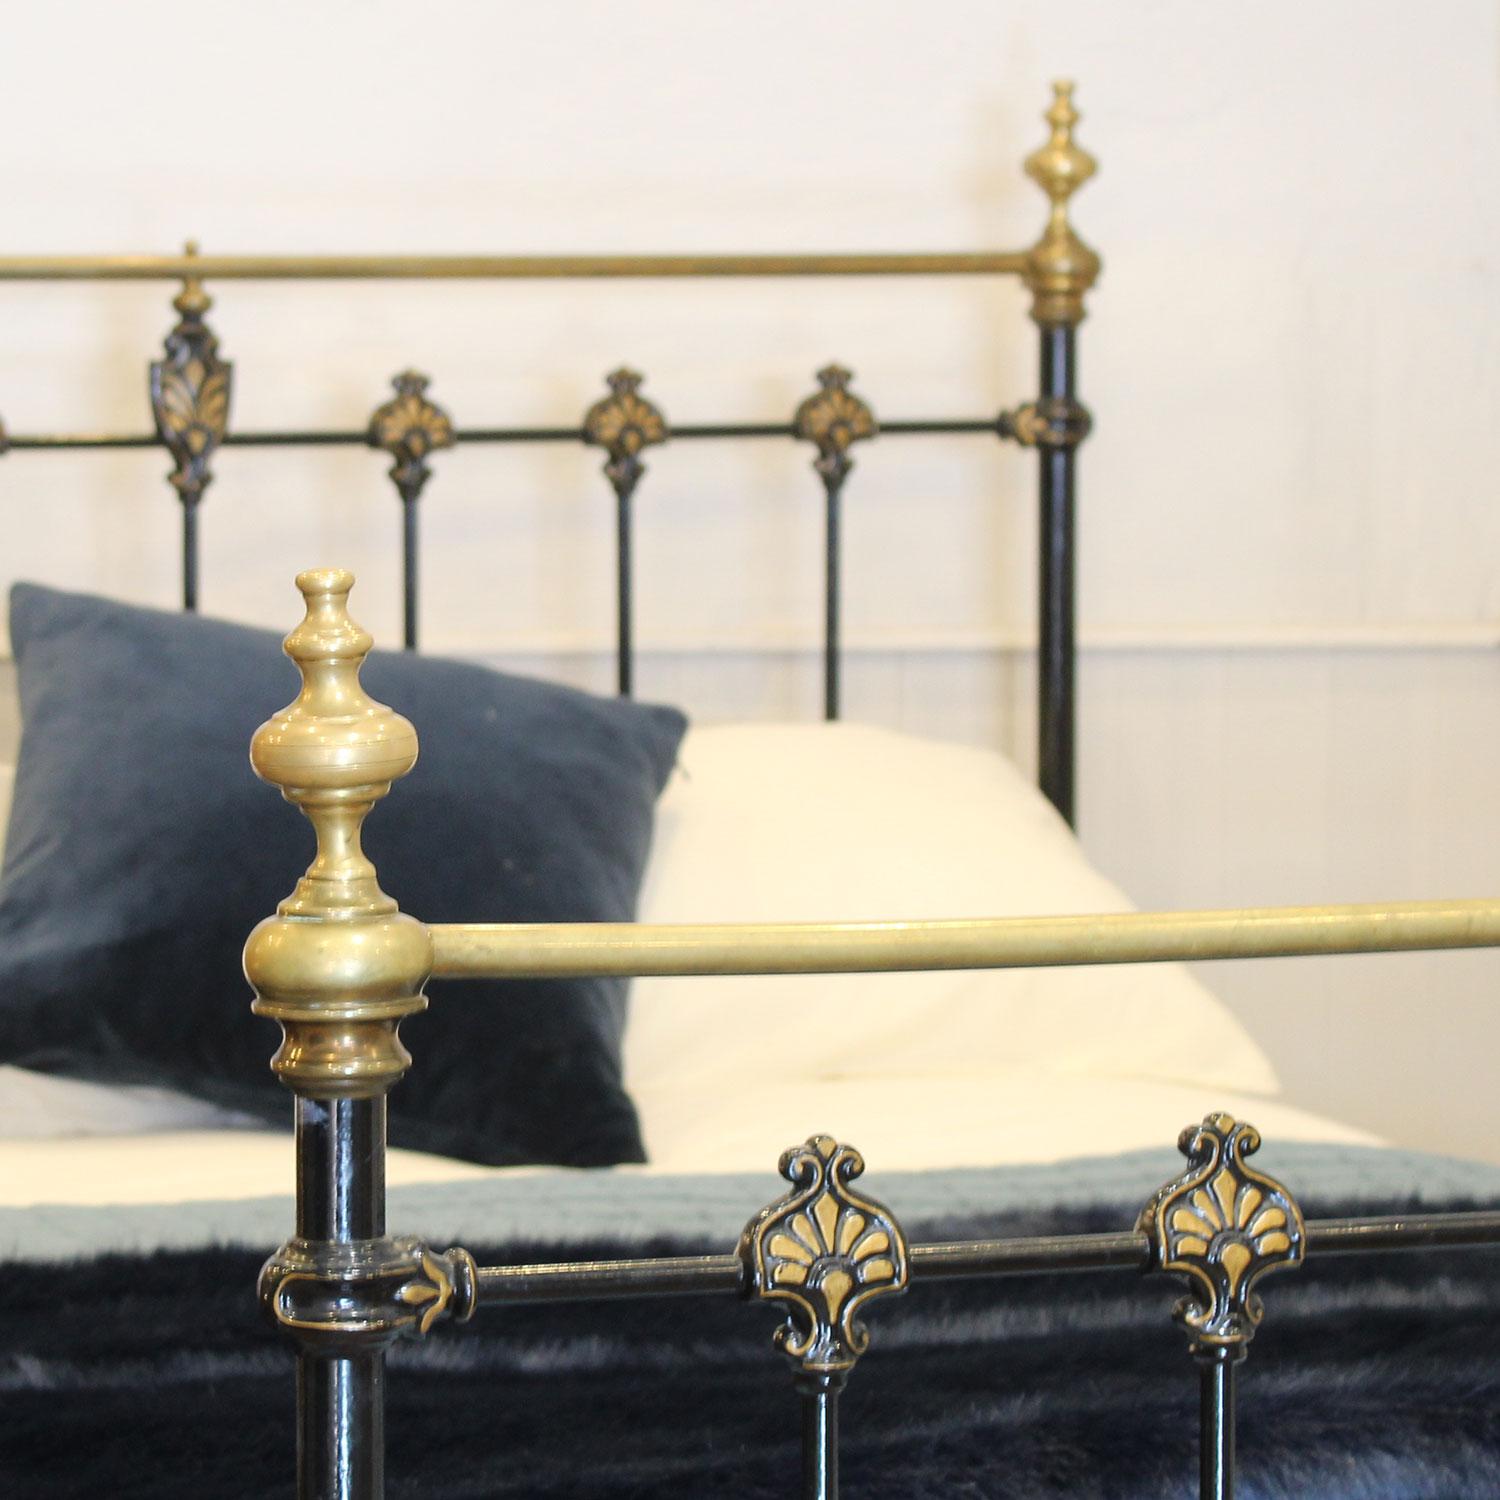 19th Century Double Brass & Iron Bed in Black, MD126